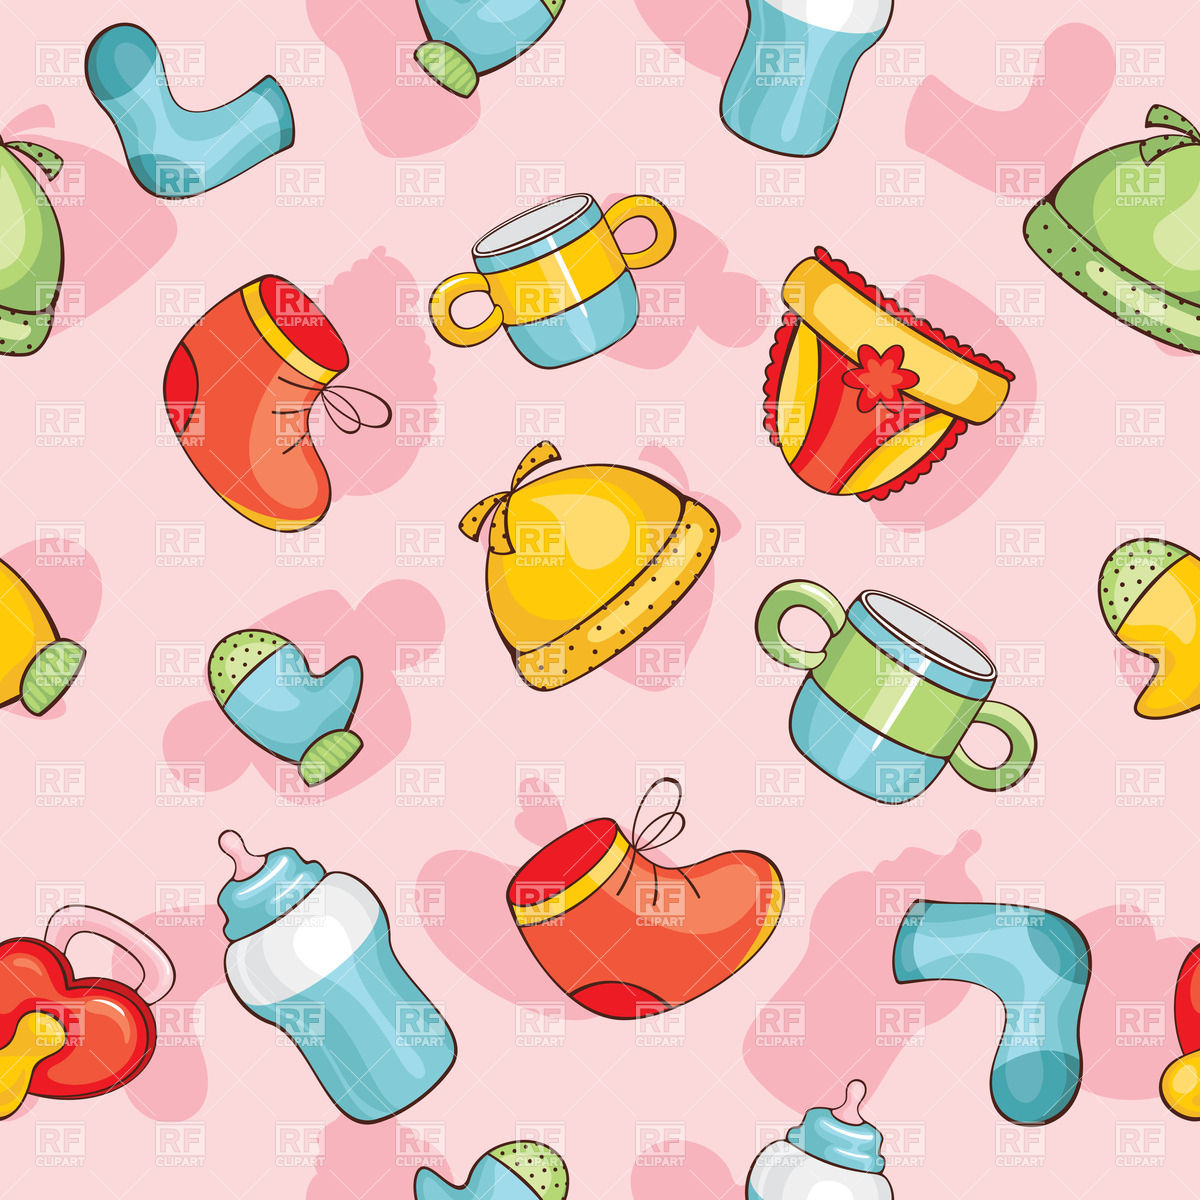 Baby Clothes  Seamless Pattern With Clothing Items For Newborns And